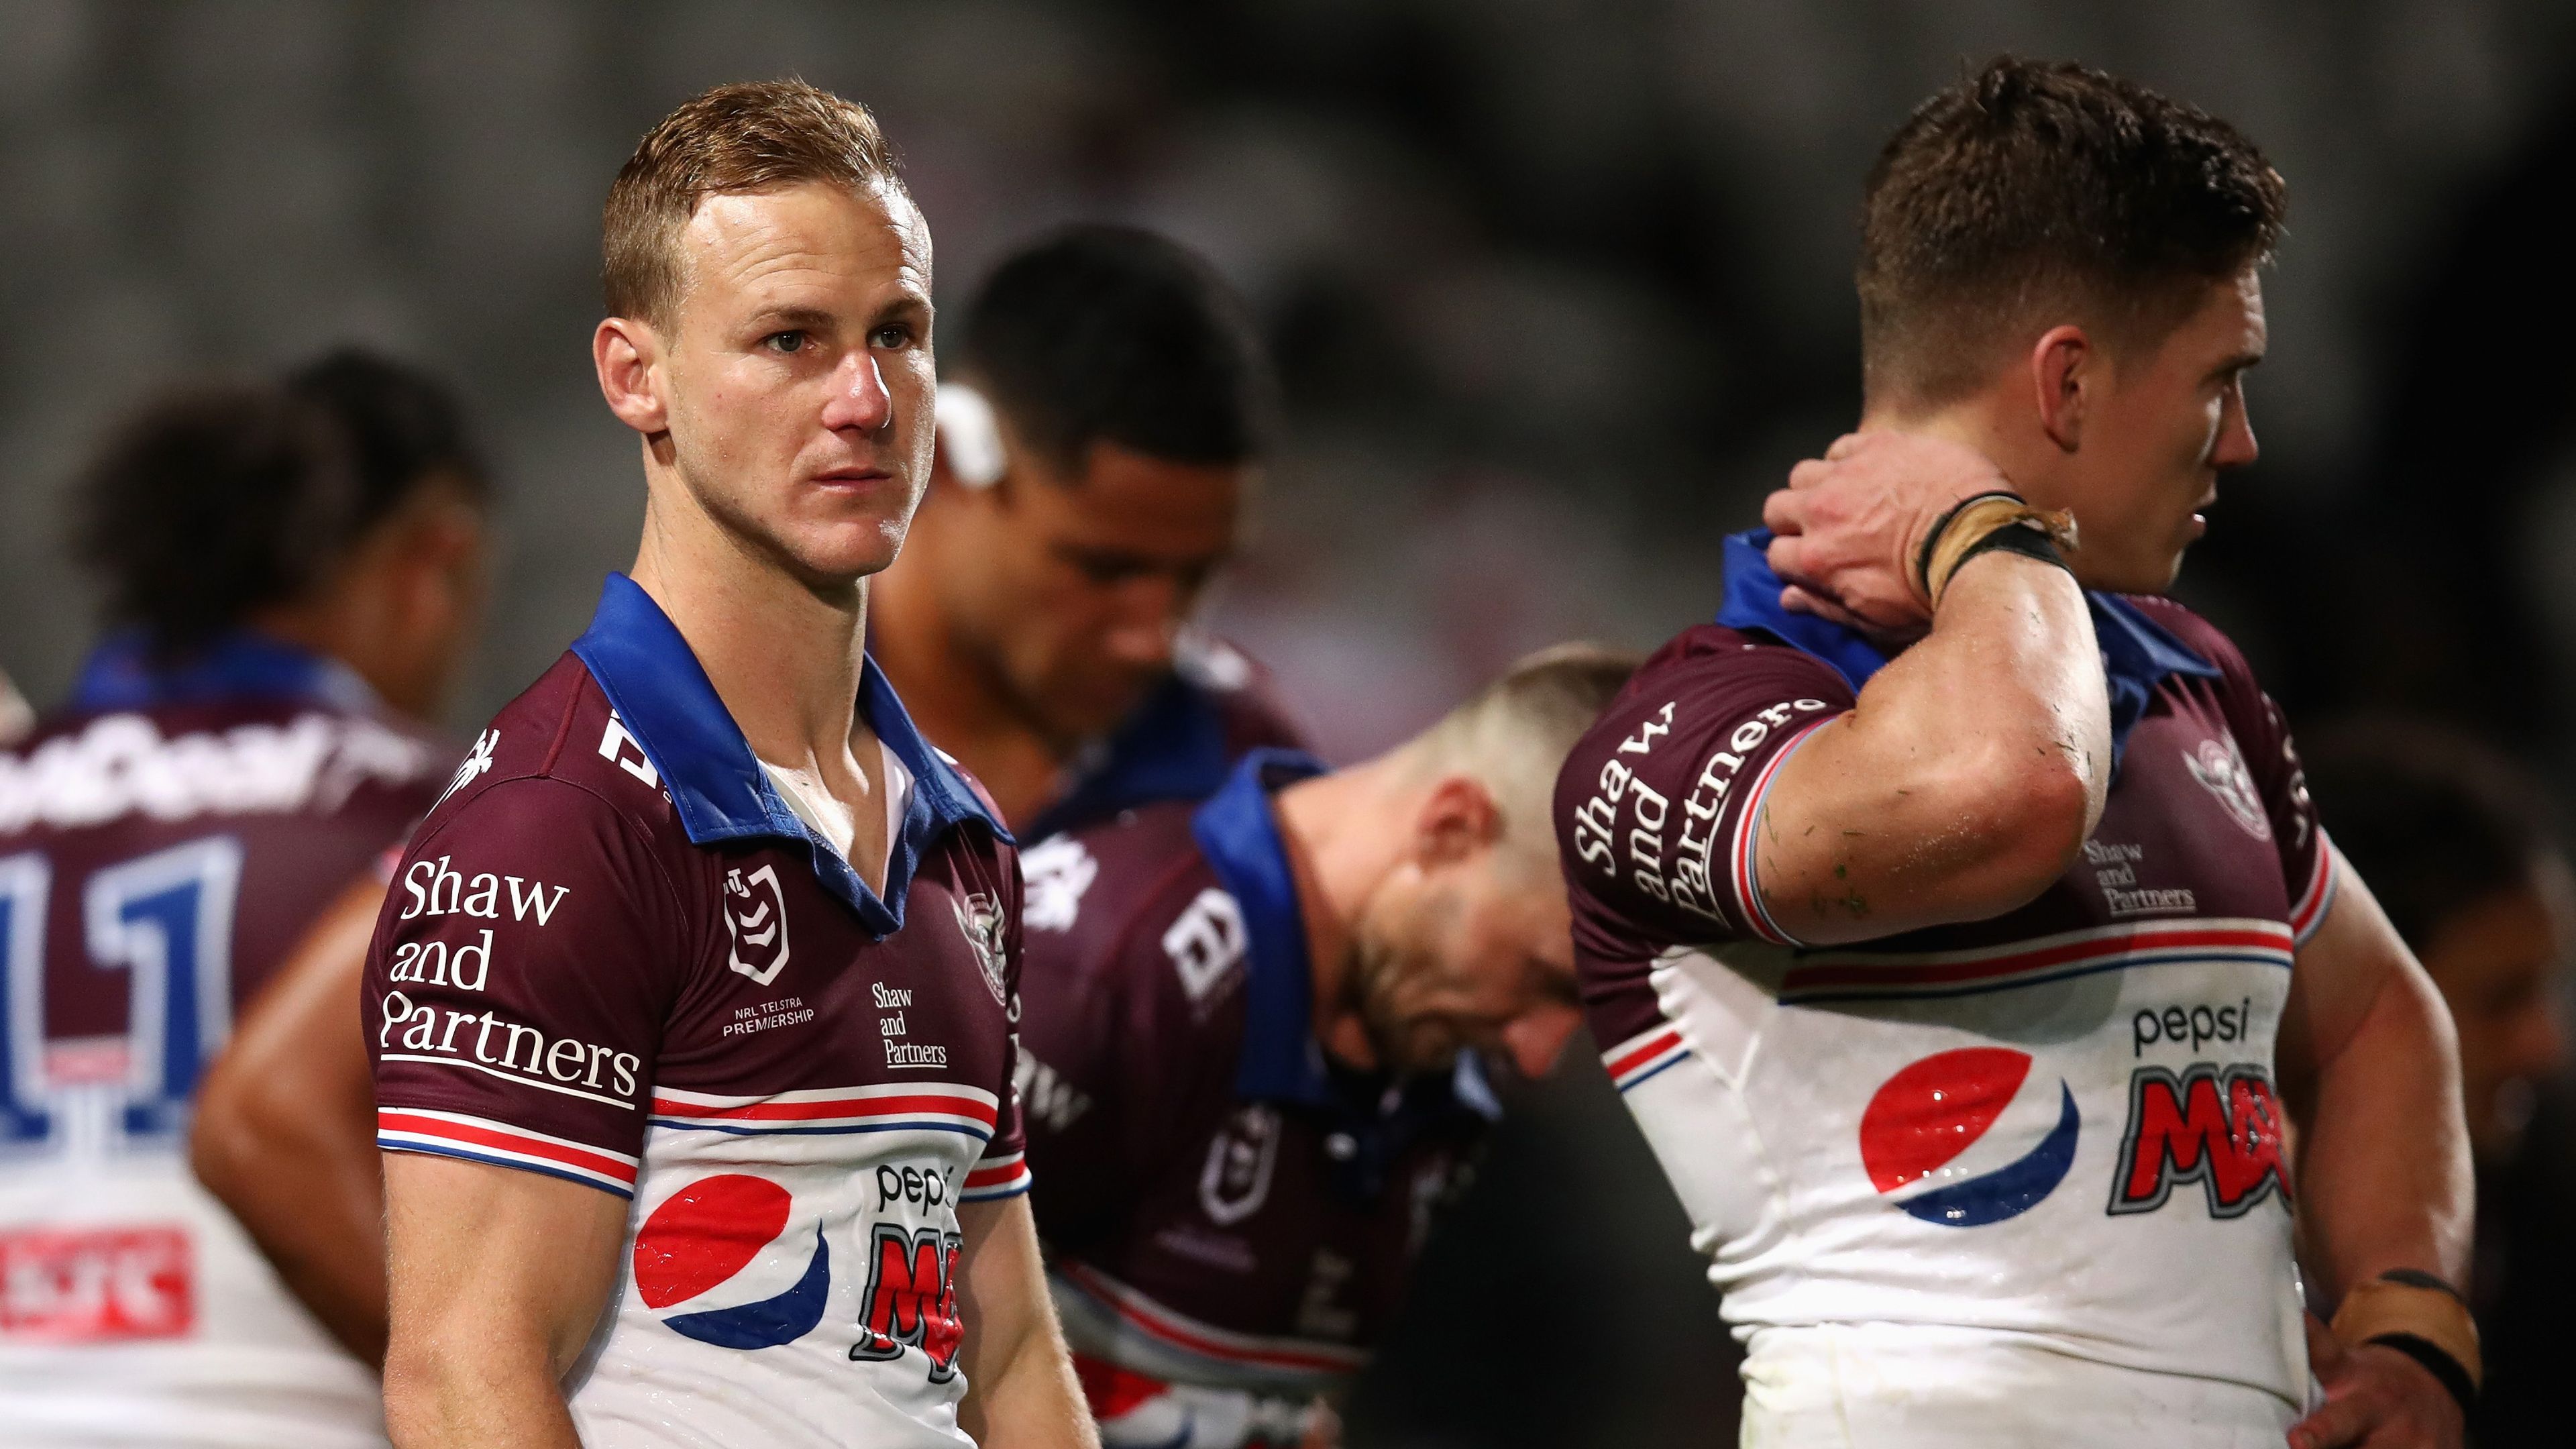 Manly coach Des Hasler laments lopsided penalty count in loss to the Dragons